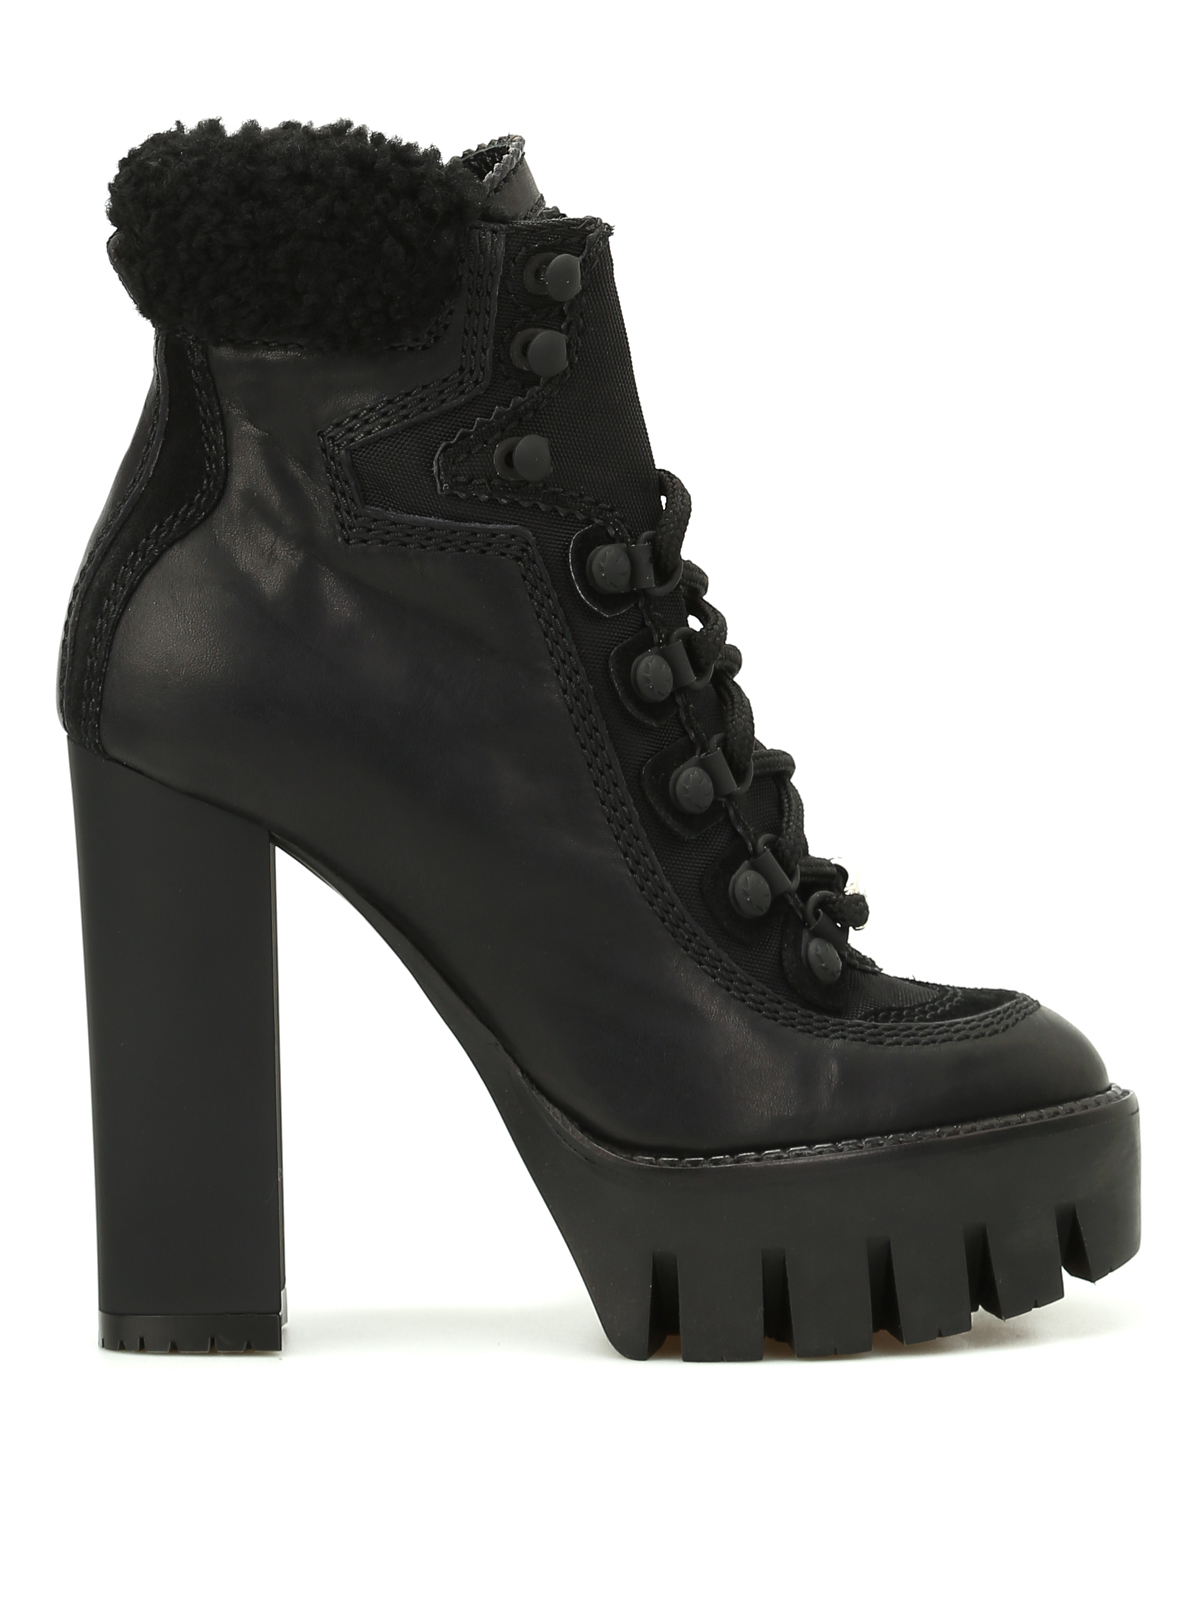 Blondo black leather buckle heel tall Boots | Buckled heels, Boots, Tall  boots